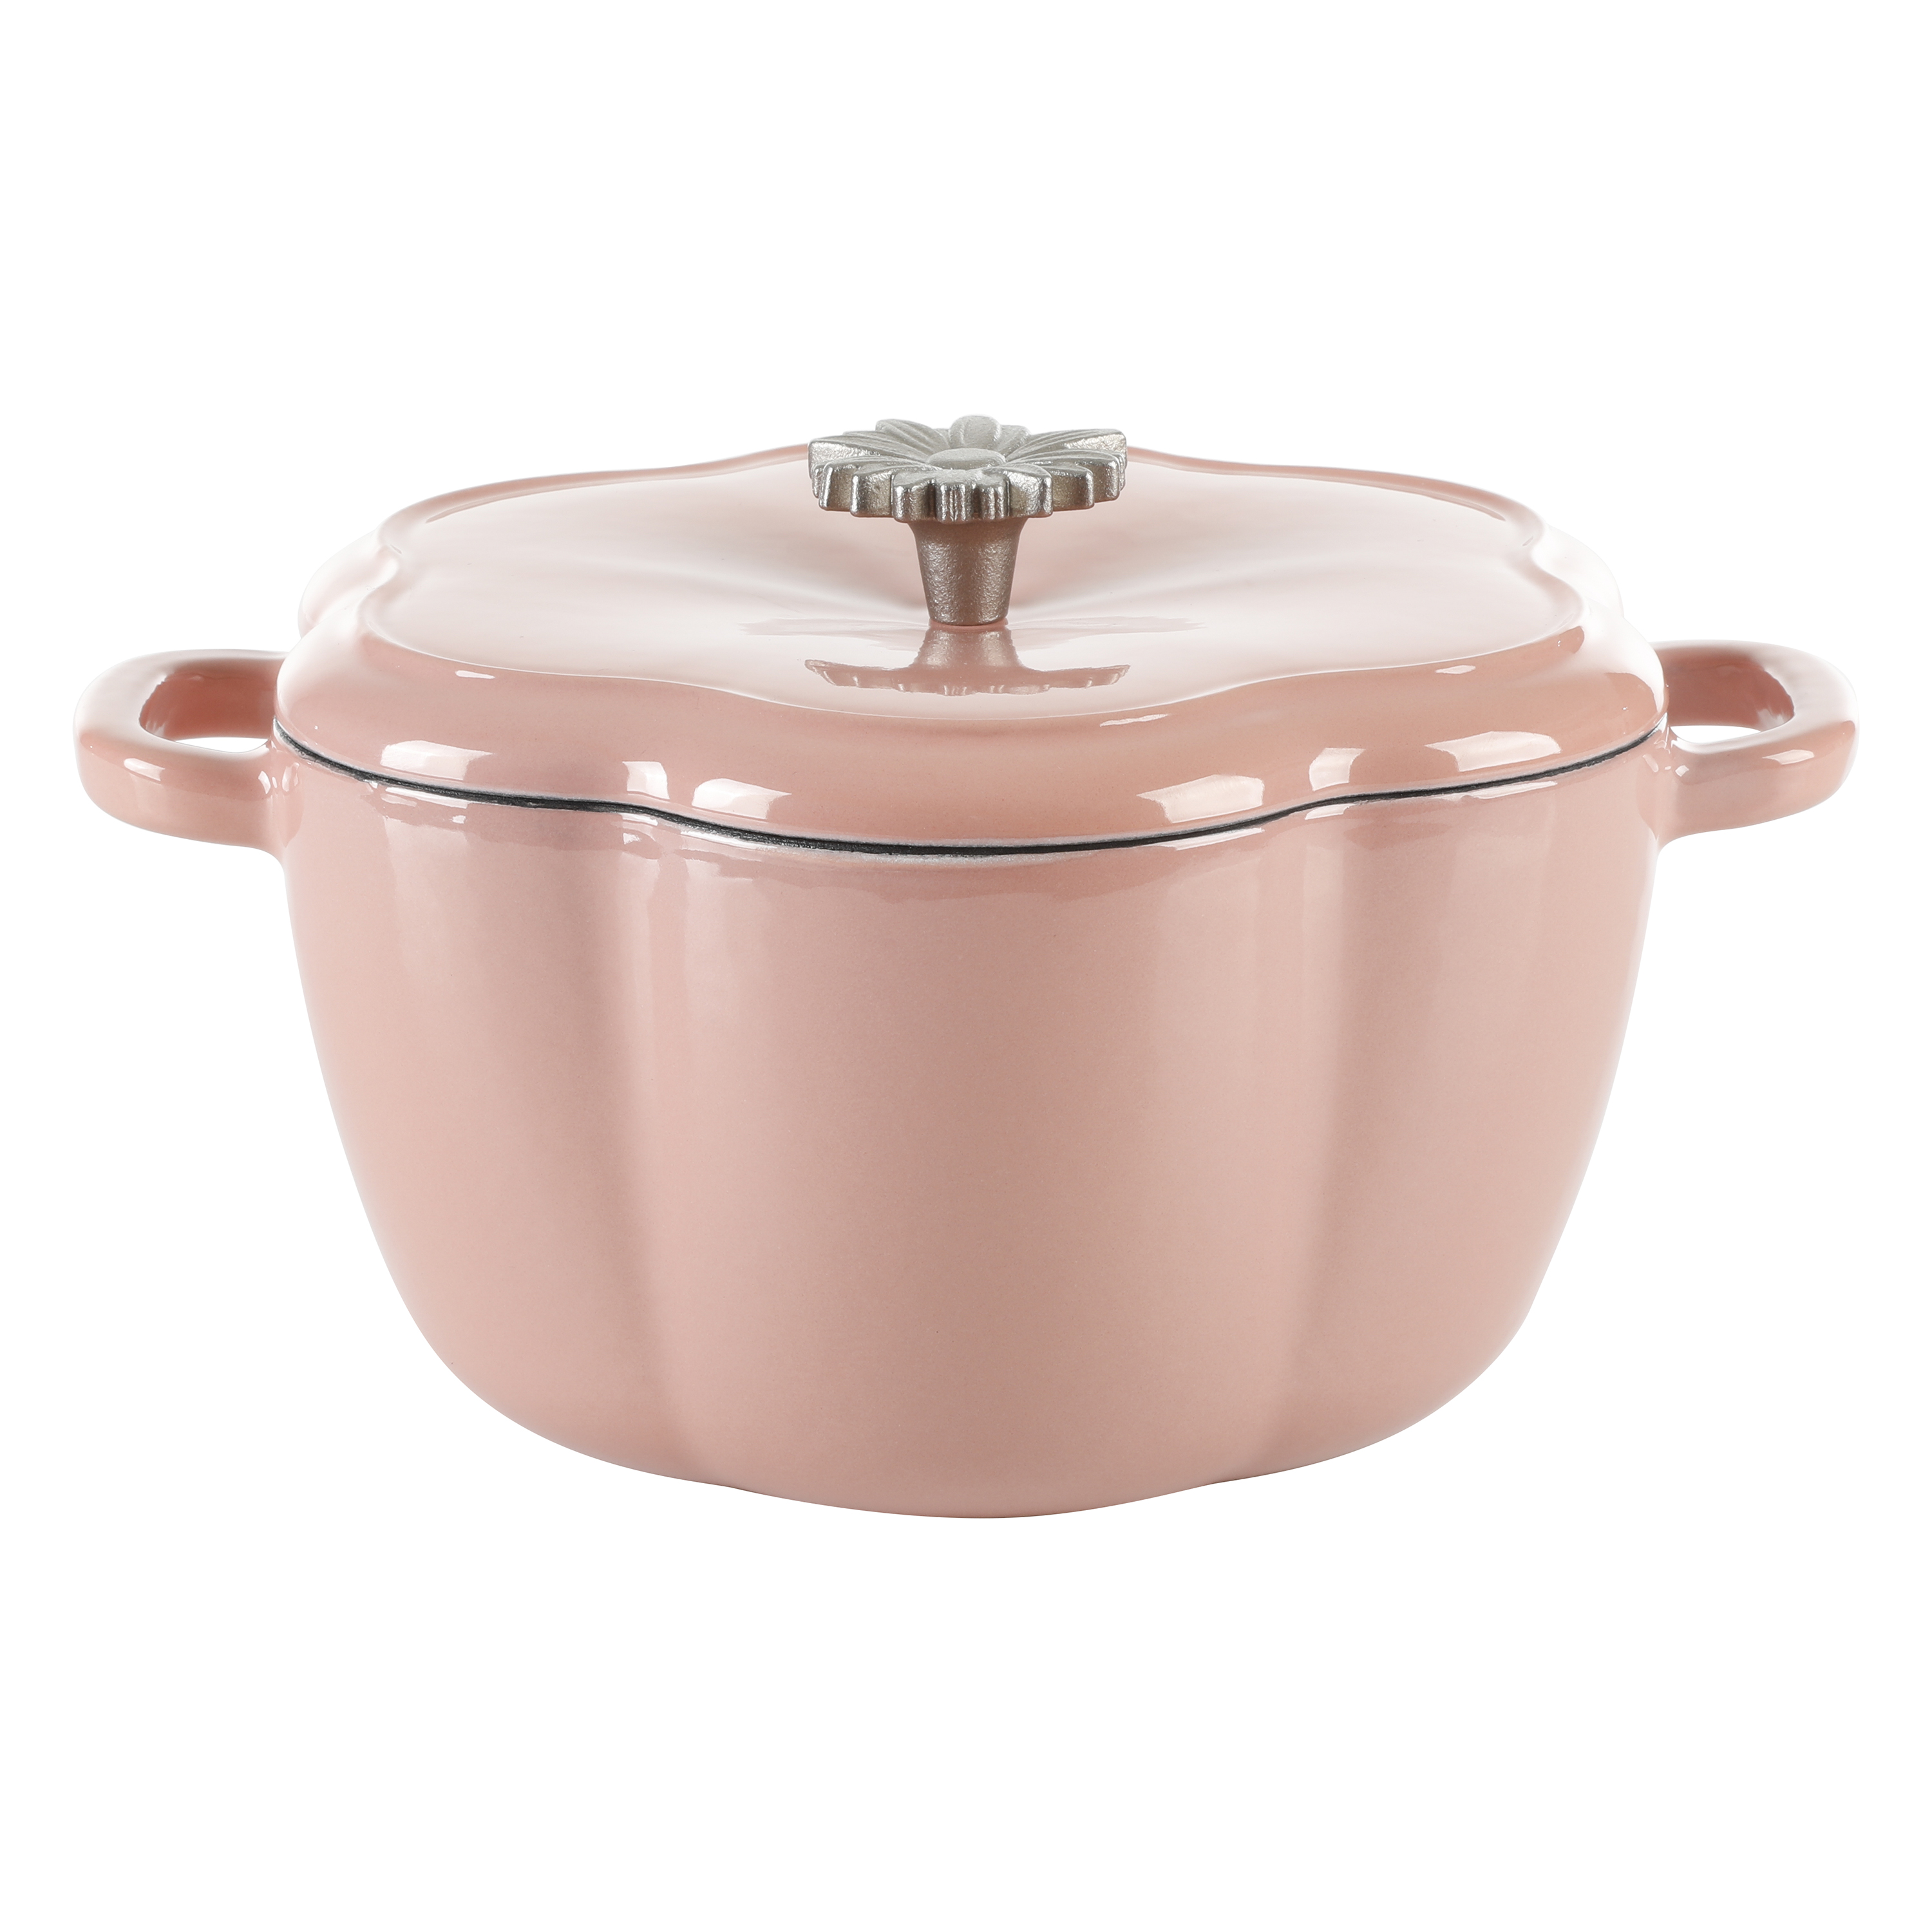 The Pioneer Woman Timeless Beauty Enamel on Cast Iron 3-Quart Dutch Oven, Pink - image 1 of 9